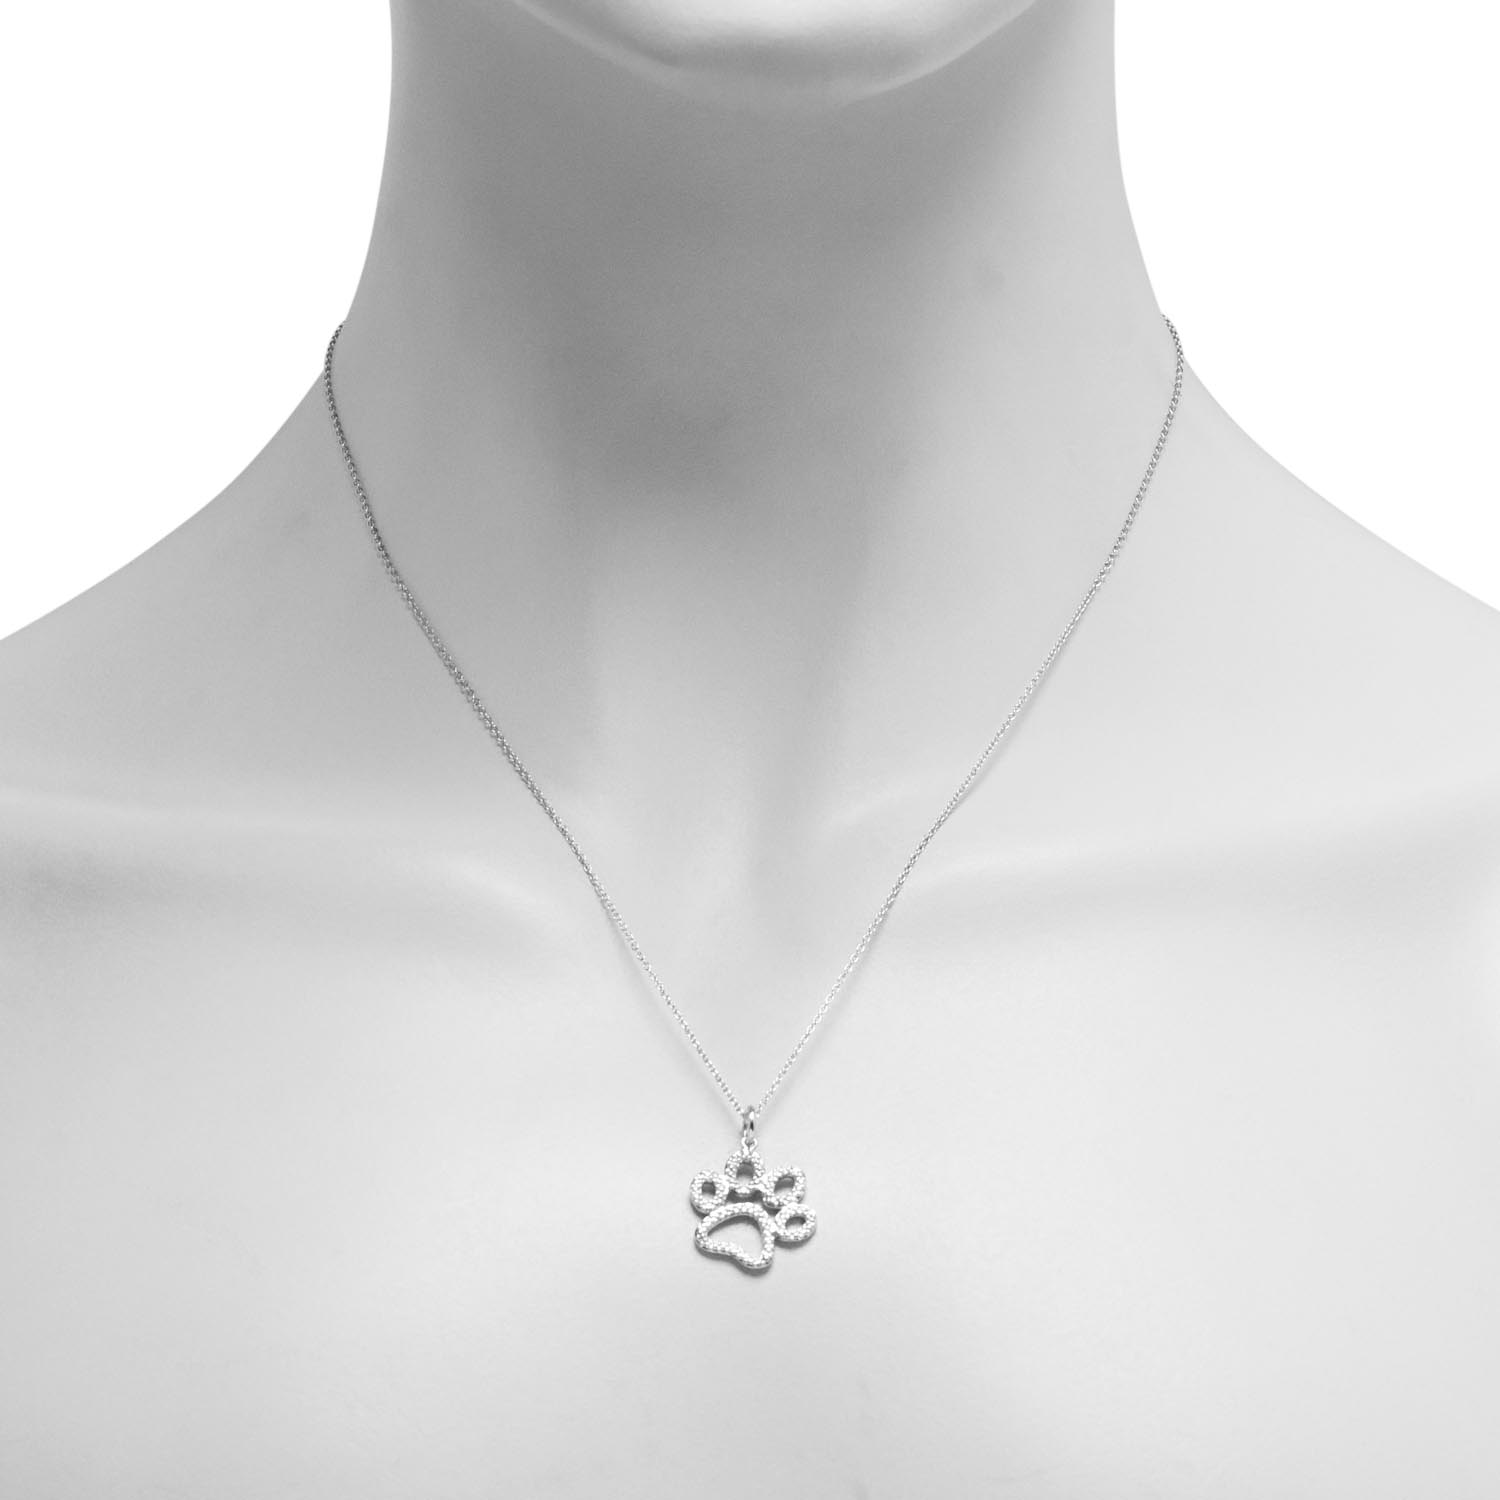 Paw Print Necklace in Sterling Silver with Diamonds (1/20ct tw)